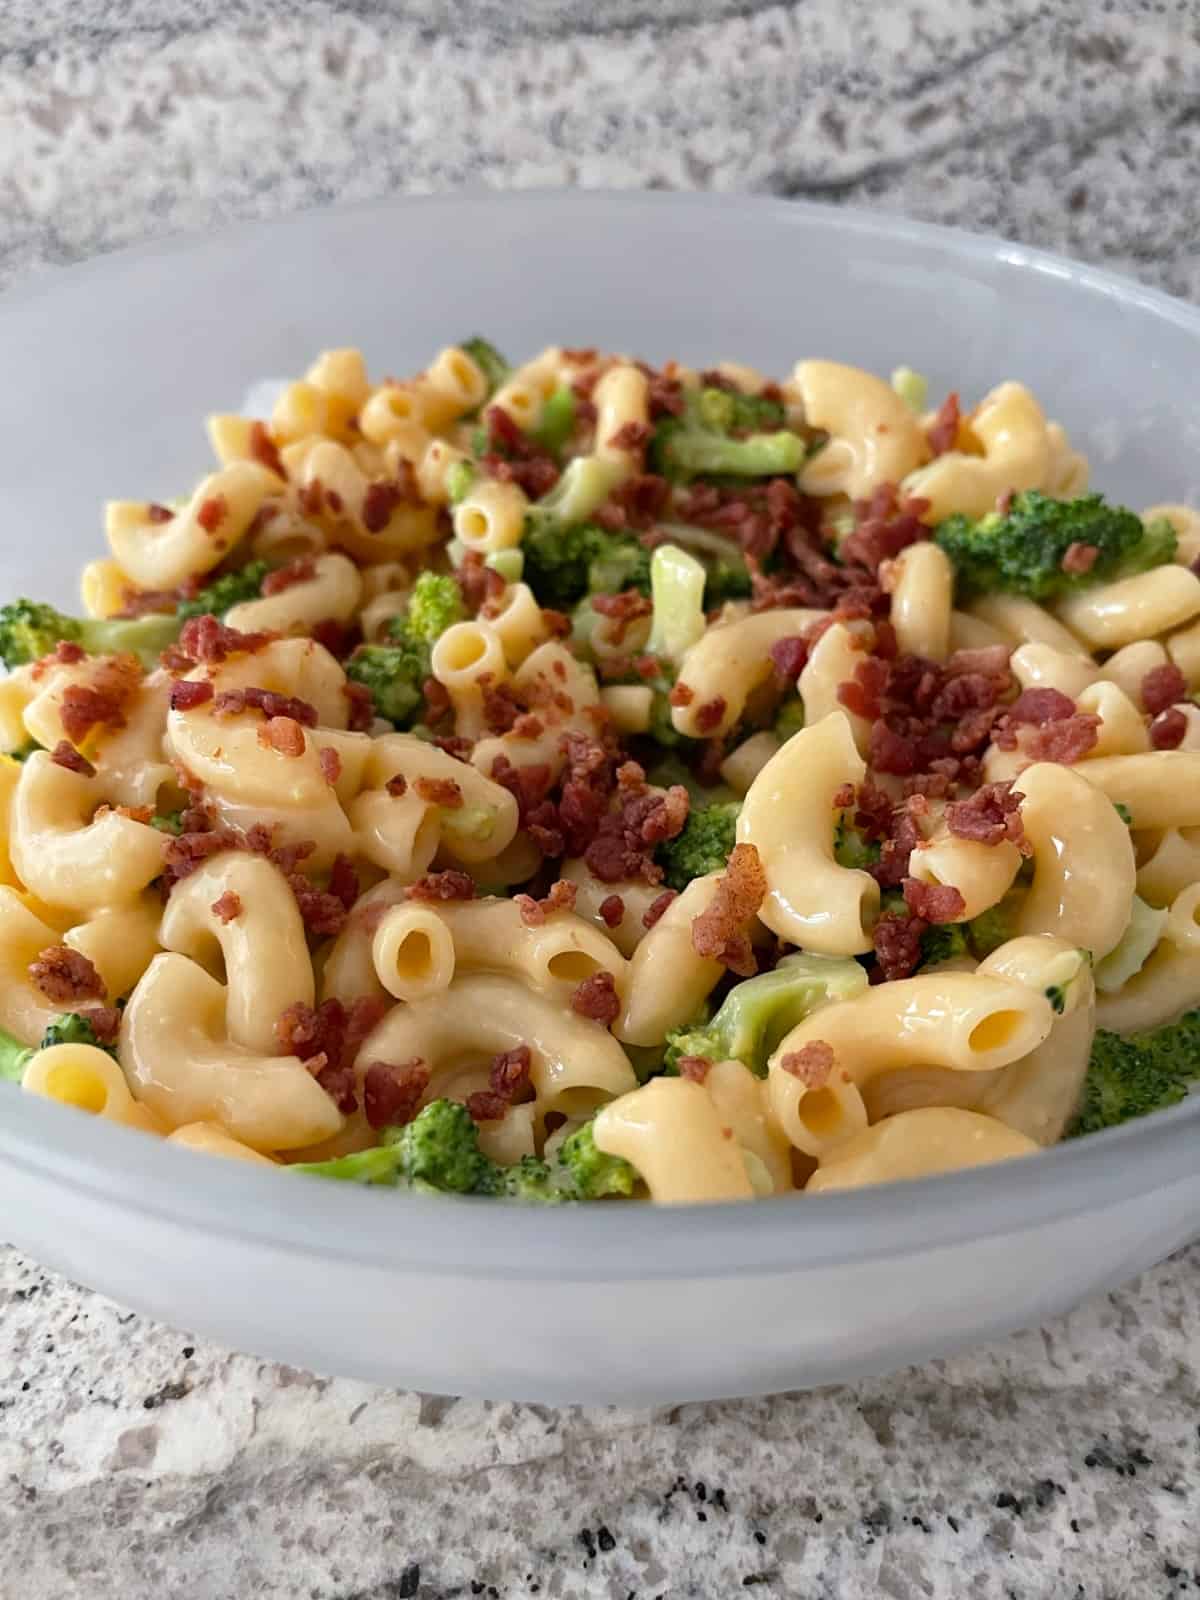 Broccoli bacon macaroni and cheese in white serving dish.